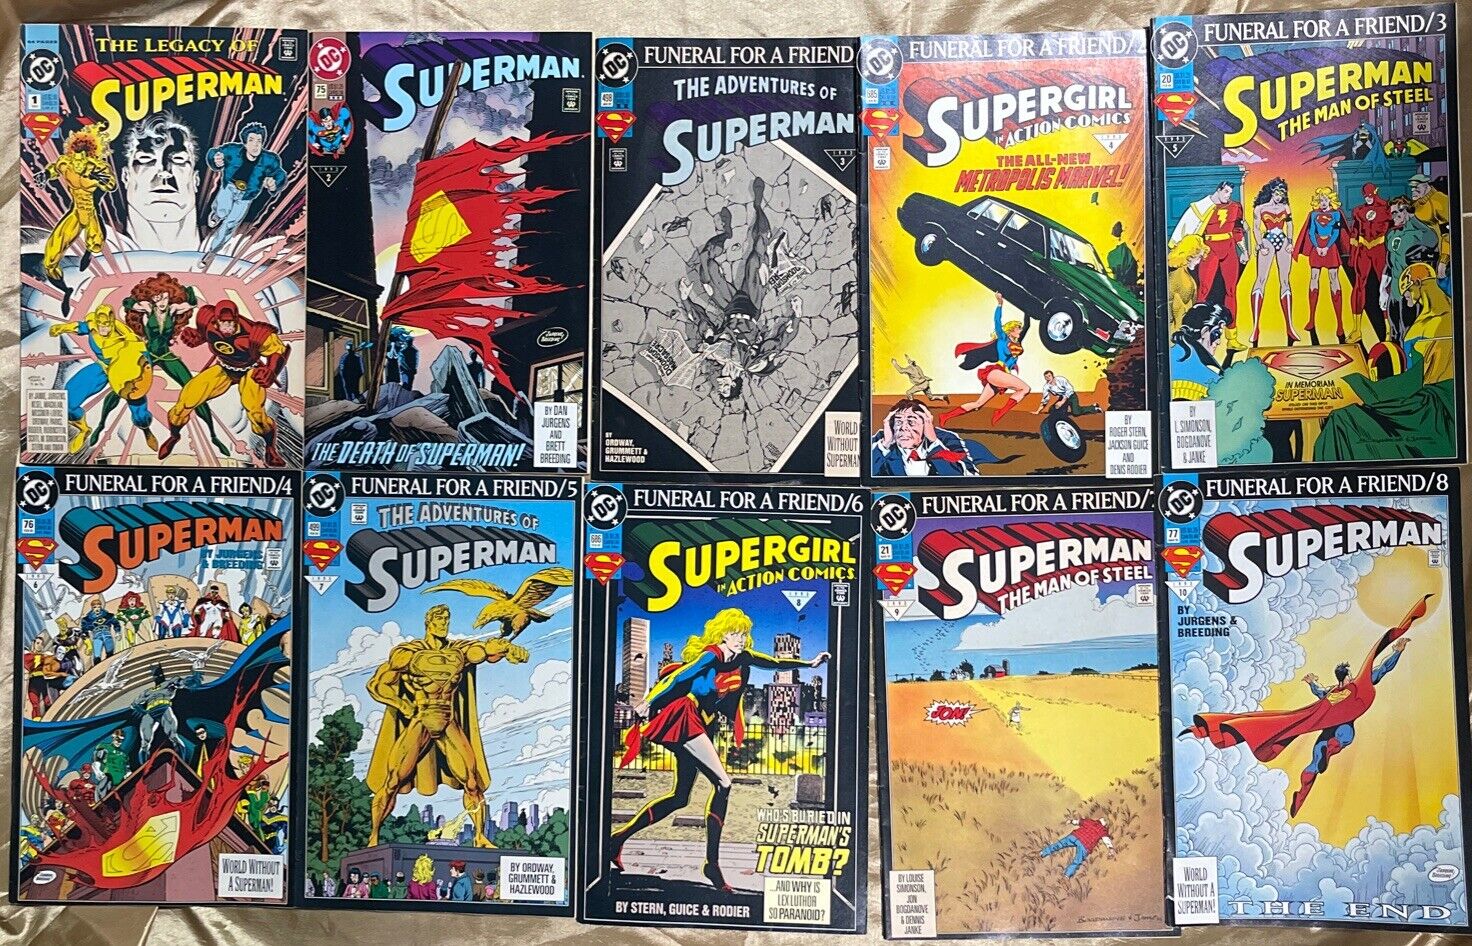 SUPERMAN FUNERAL FOR A FRIEND #1-8 COMPLETE MINI SERIES Lot Of 10